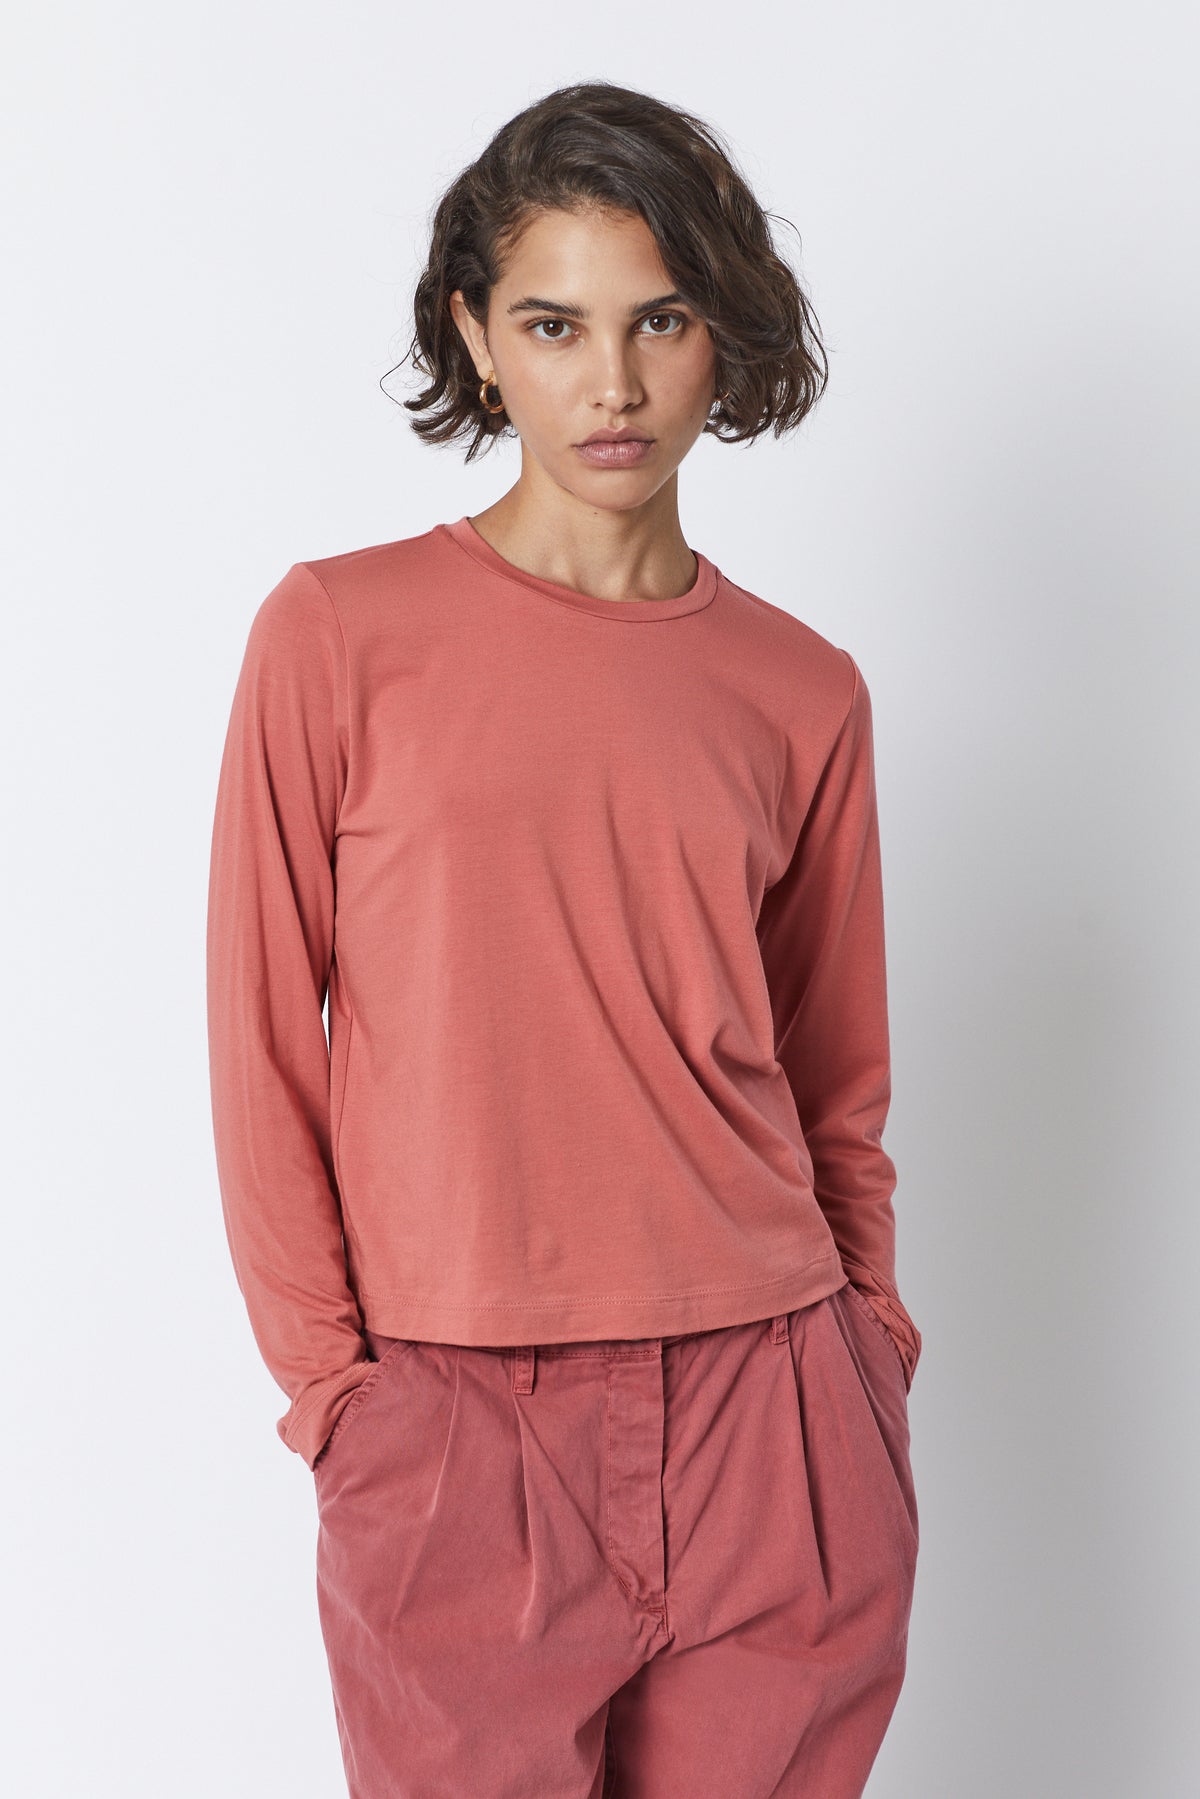 The model is wearing a Velvet by Jenny Graham pink long-sleeved PACIFICA TEE with a soft hand and pleated pants.-35495909523649